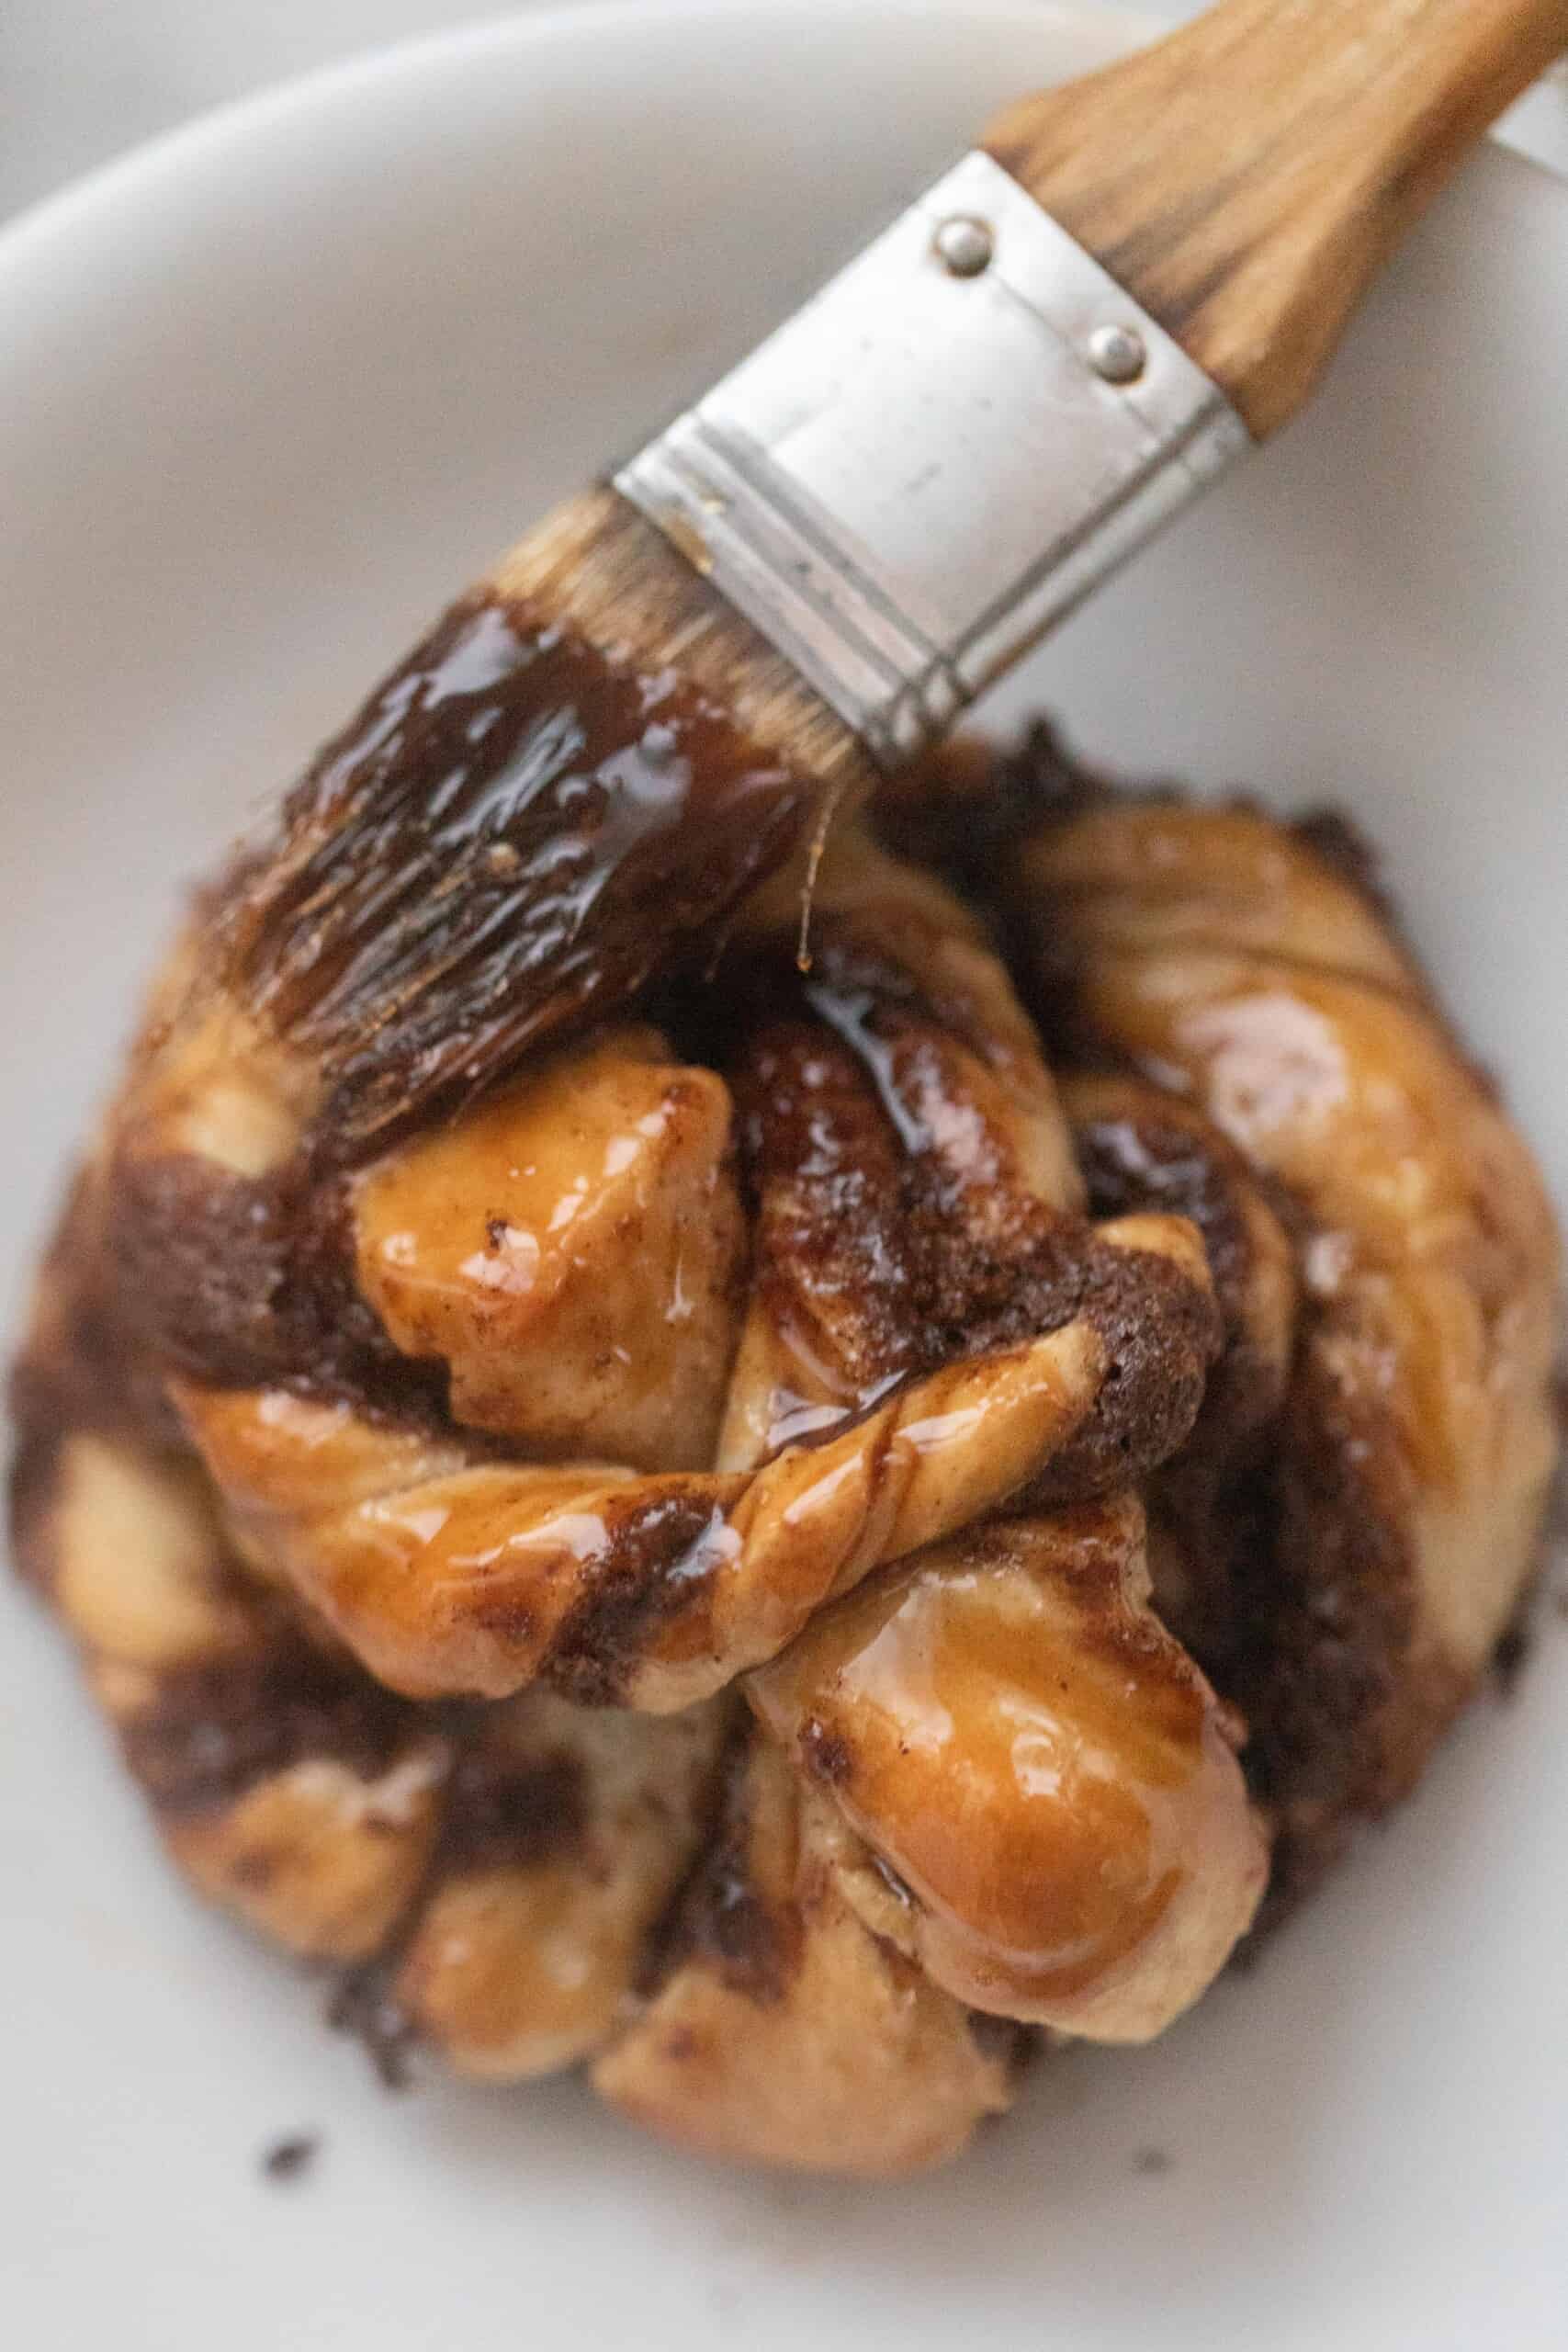 A Swedish cinnamon bun on a white countertop being brushed with a brown sugar glaze